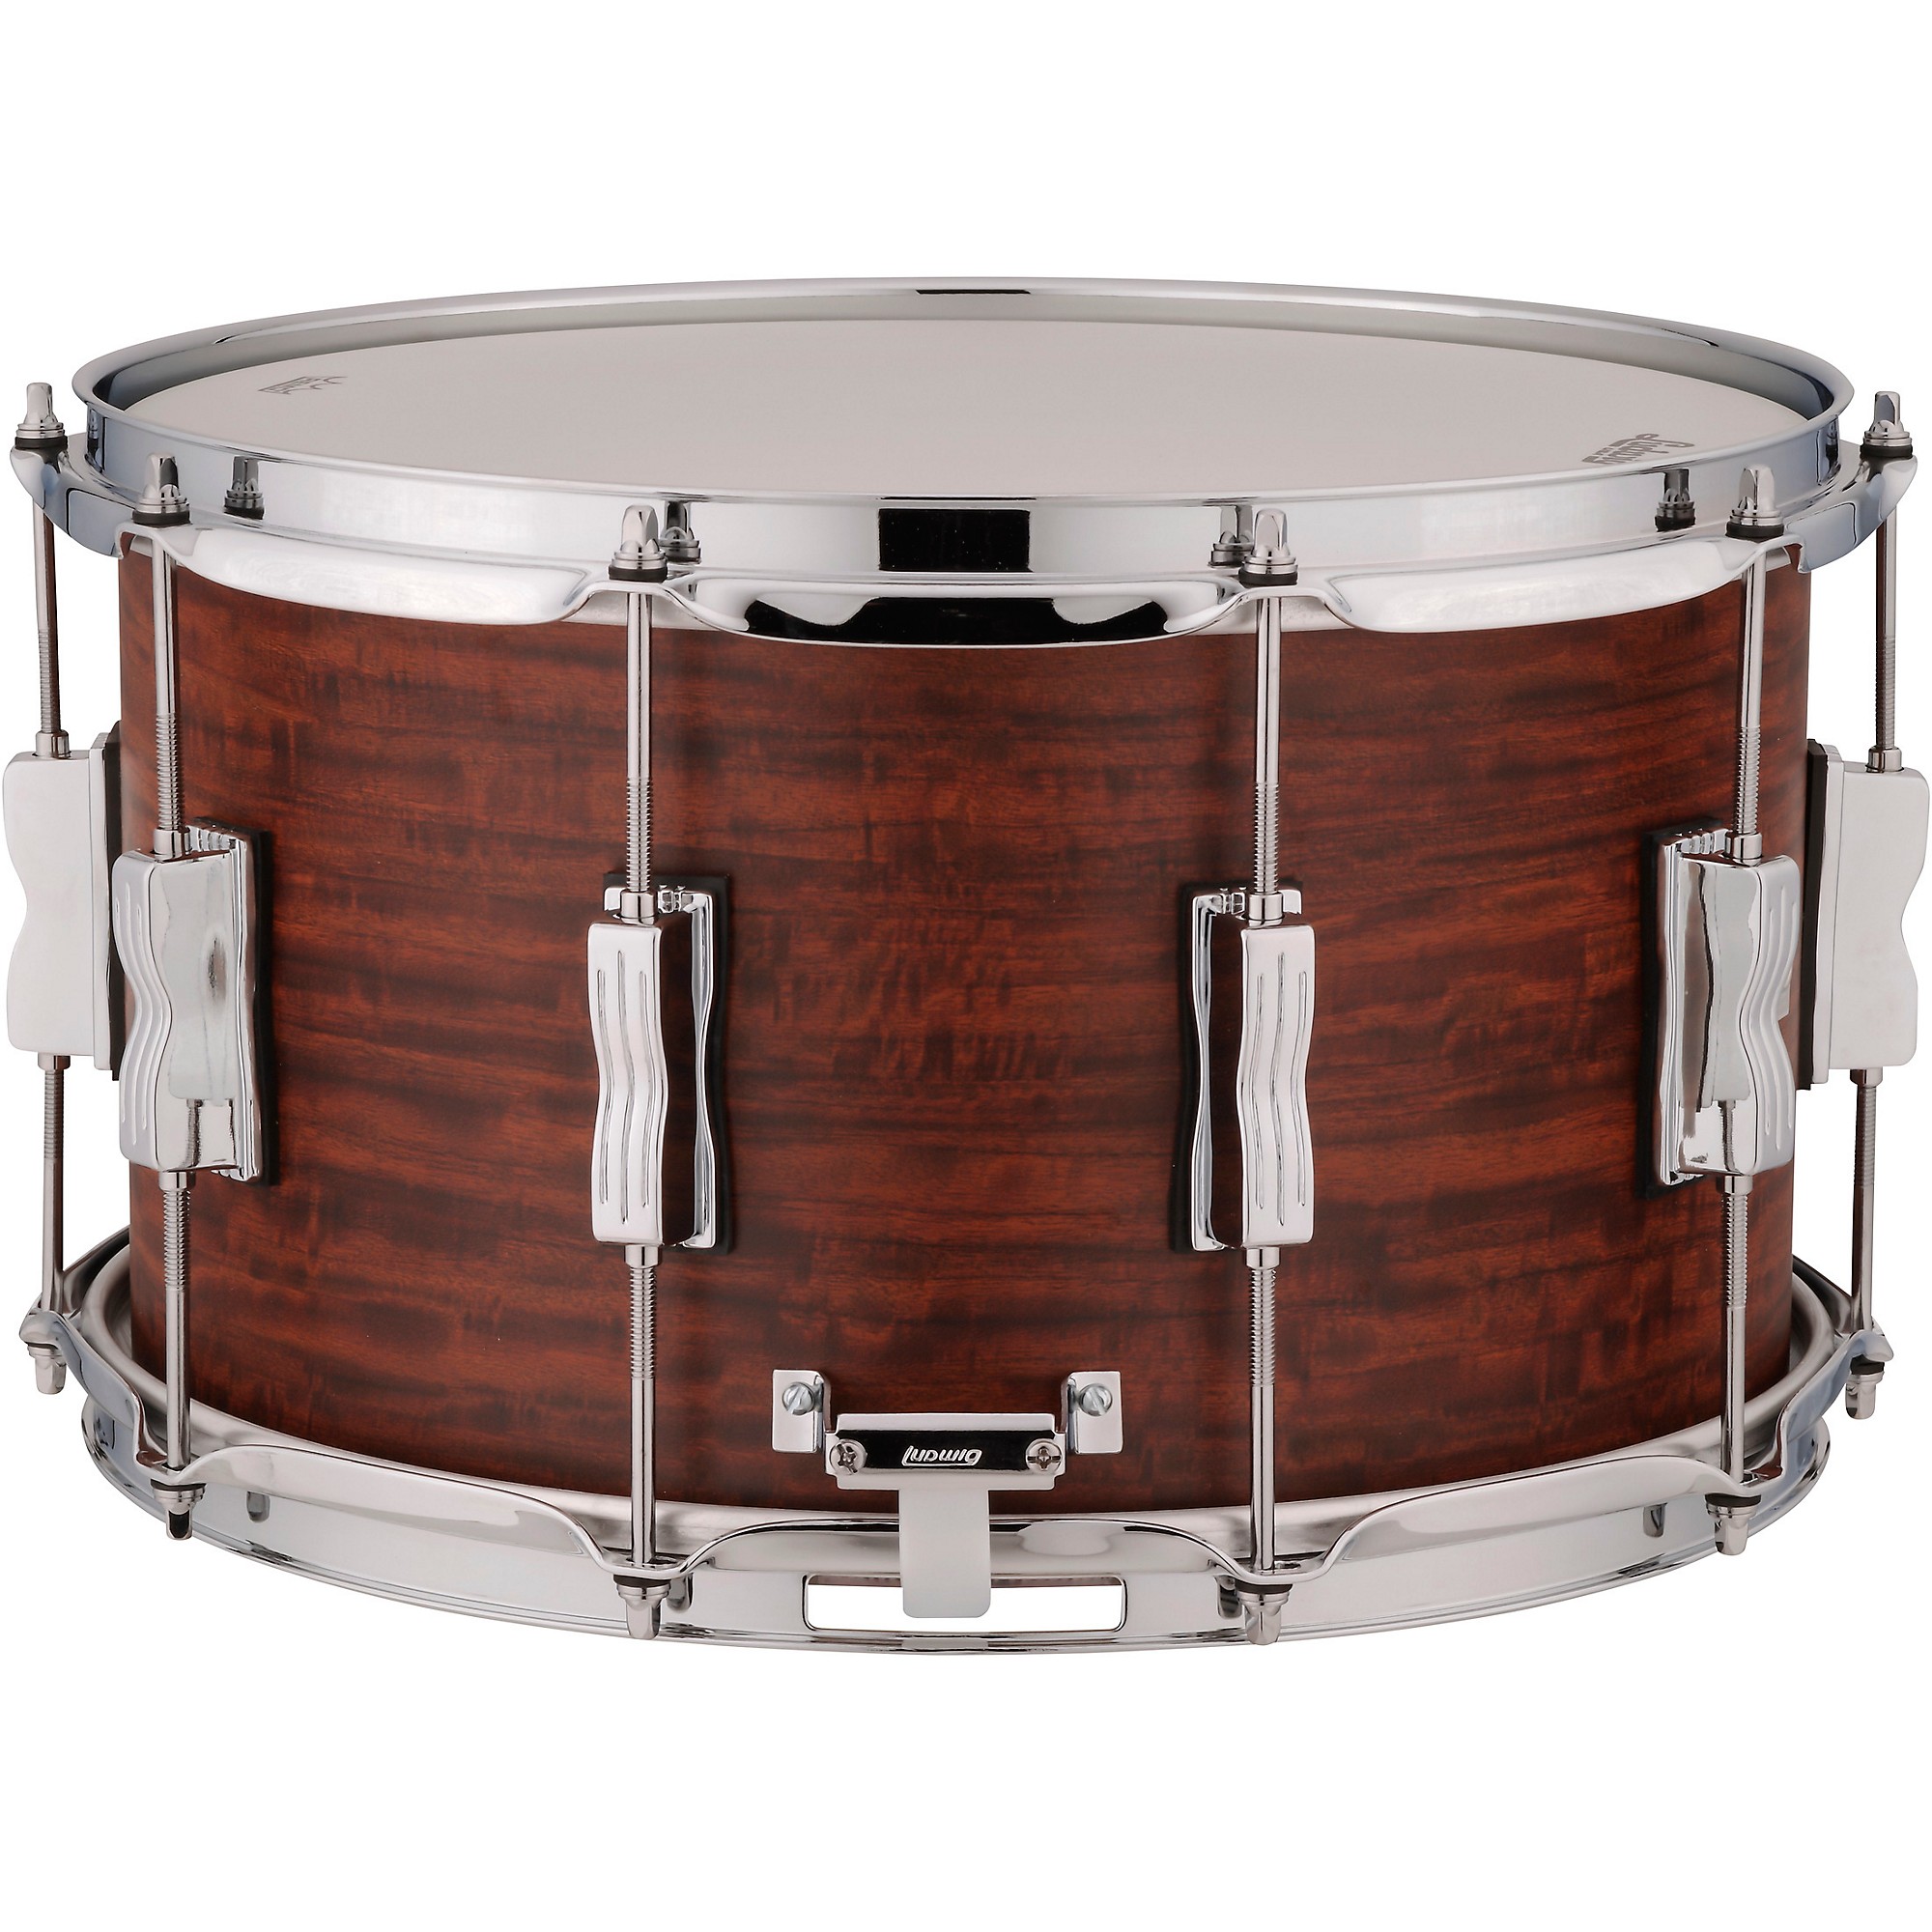 Ludwig Standard Maple Snare Drum With Aged Chestnut Veneer 14 x 8